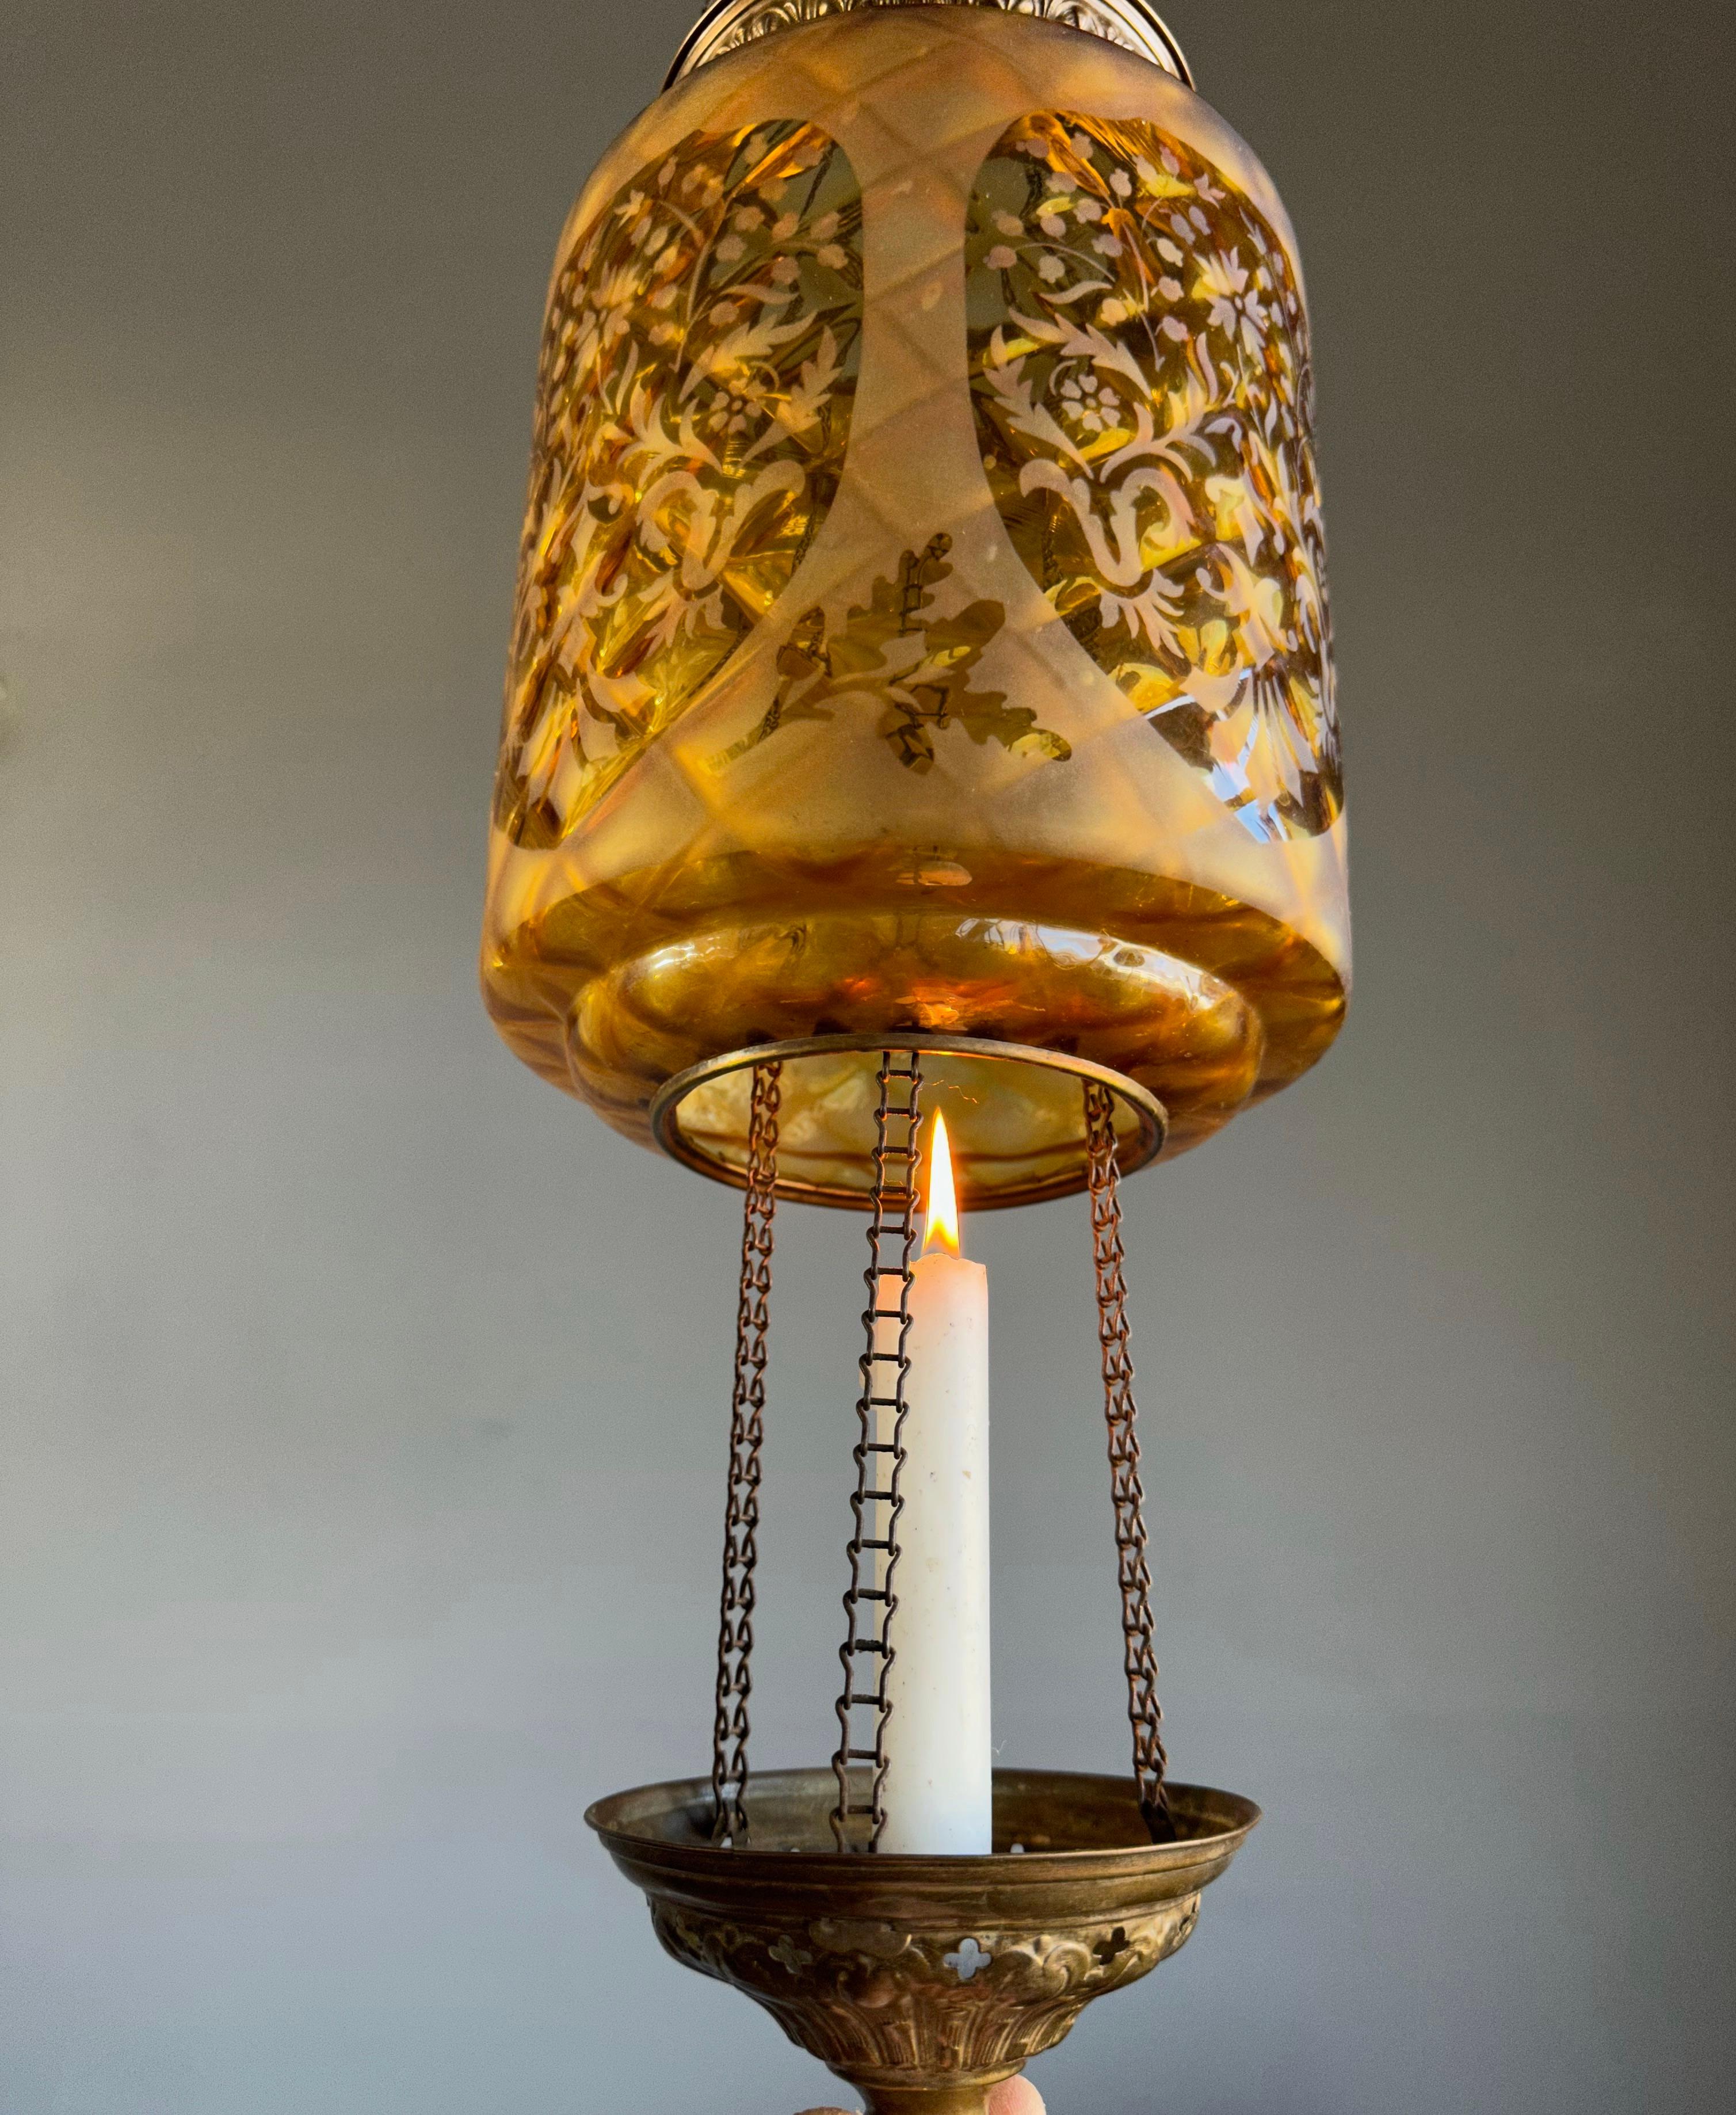 Graceful and all handcrafted antique light fixture.

This early Arts & Crafts era pendant has an aesthetic beauty that you don't find anymore in this day and age. It has the most pleasing to the eye shape and amber color and the handcrafted brass